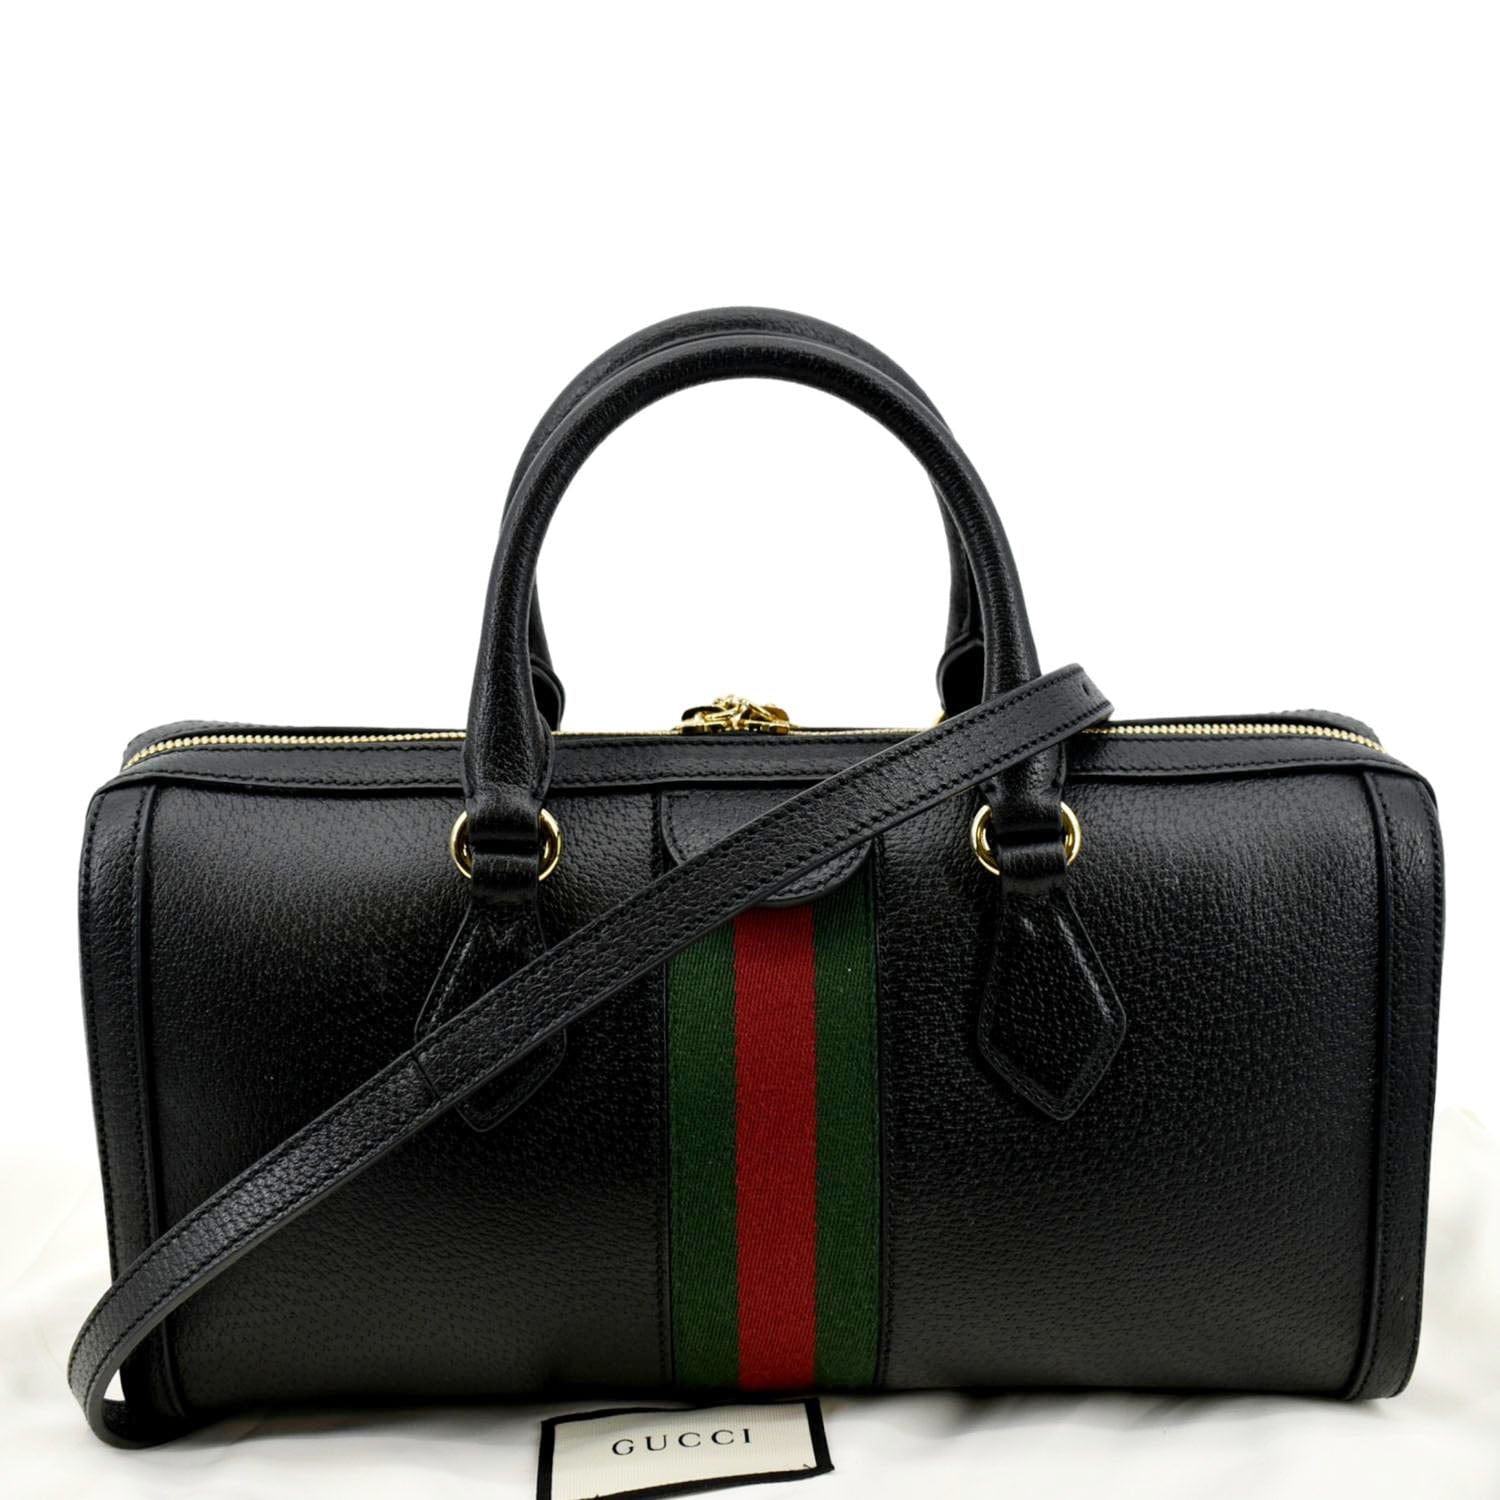 Gucci, Bags, Gg Gucci Ophidia Boston Handle Bag With Carry Strap Vgc